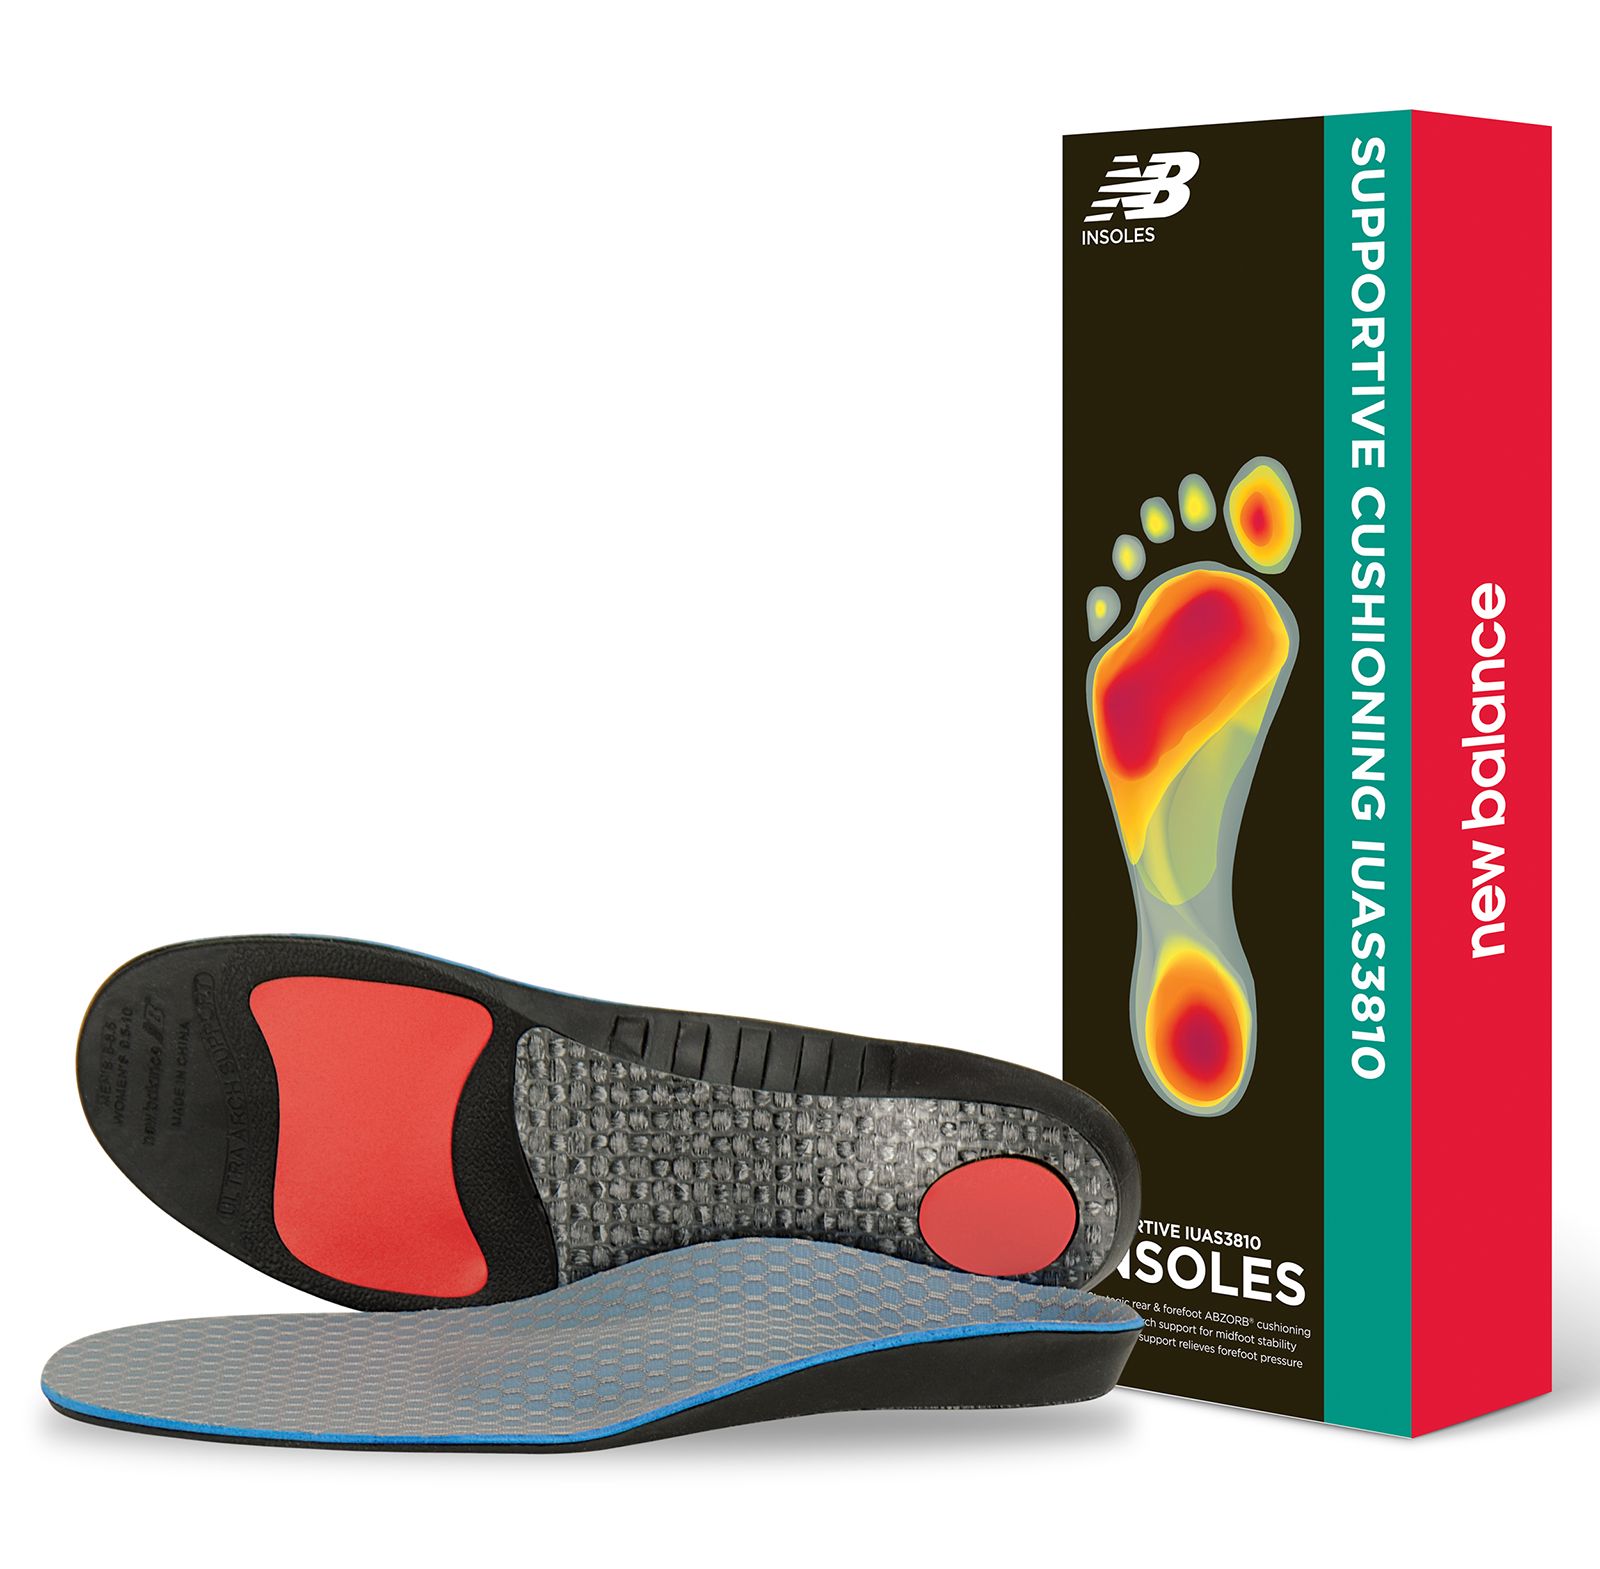 new balance insoles 3810 ultra support insole shoe